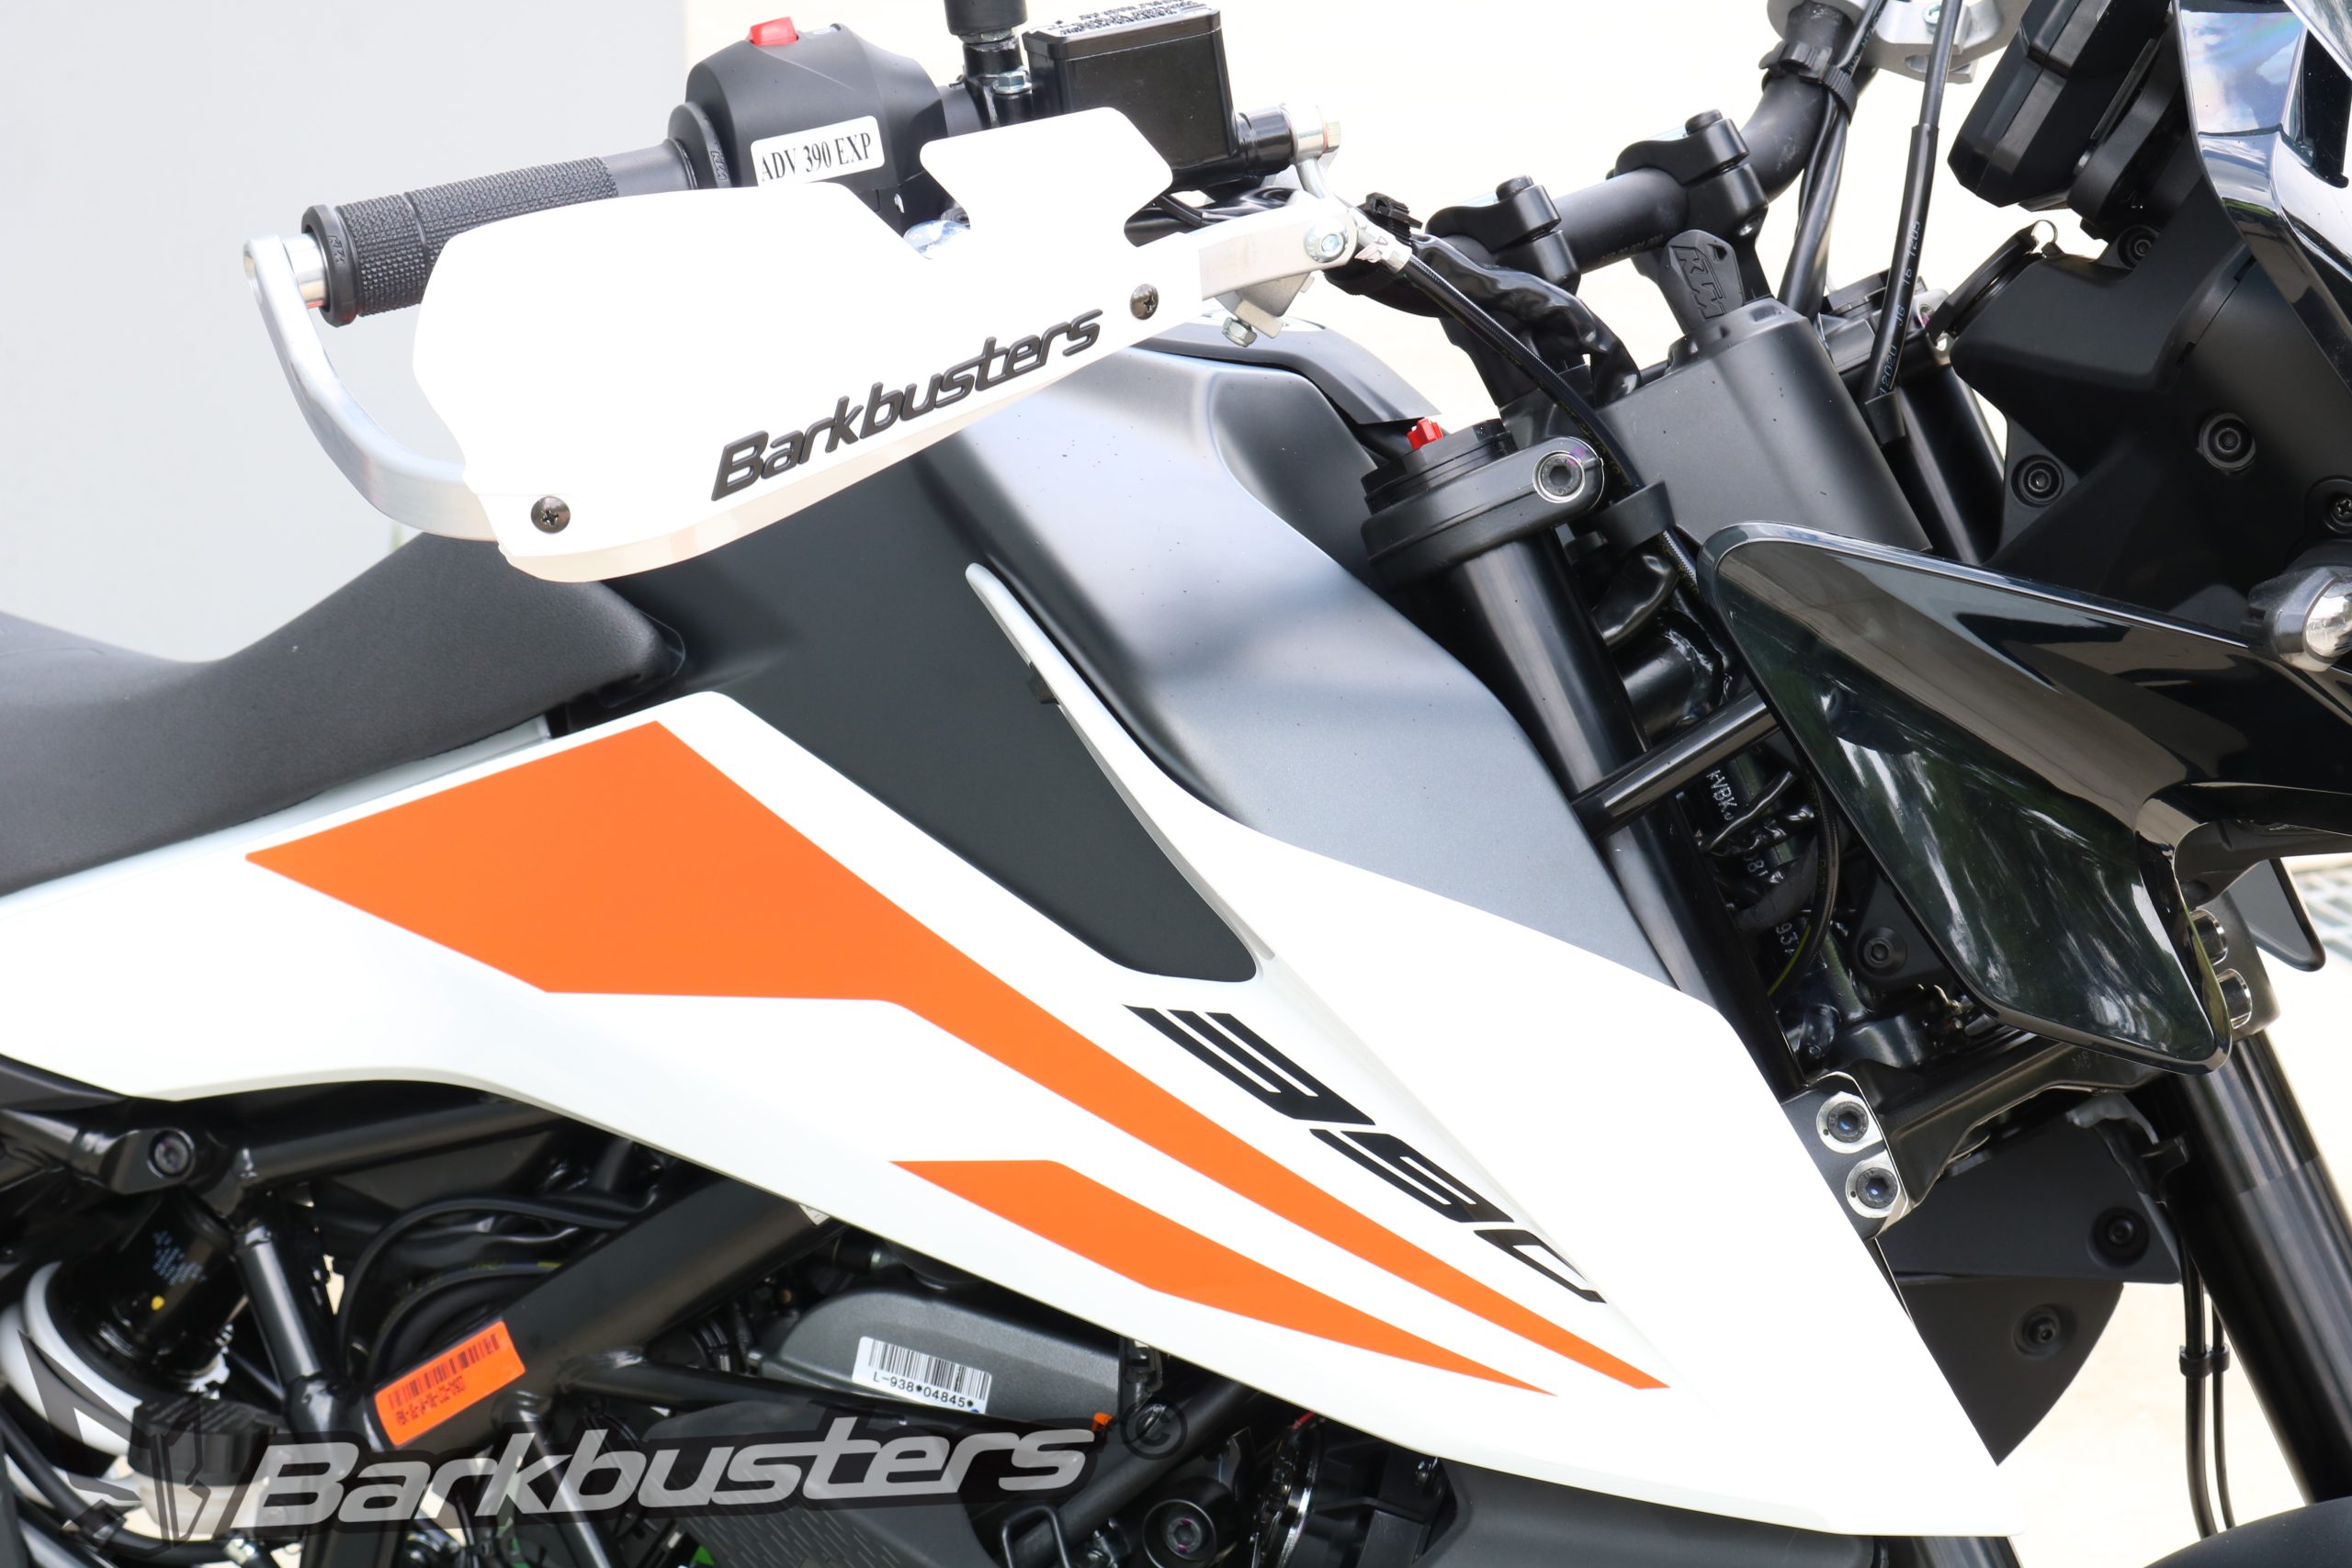 BARKBUSTERS Handguard Hardware Kit (Code: BHG-084) fitted to KTM 390 Adventure with VPS guards (Code: VPS-003) sold separately